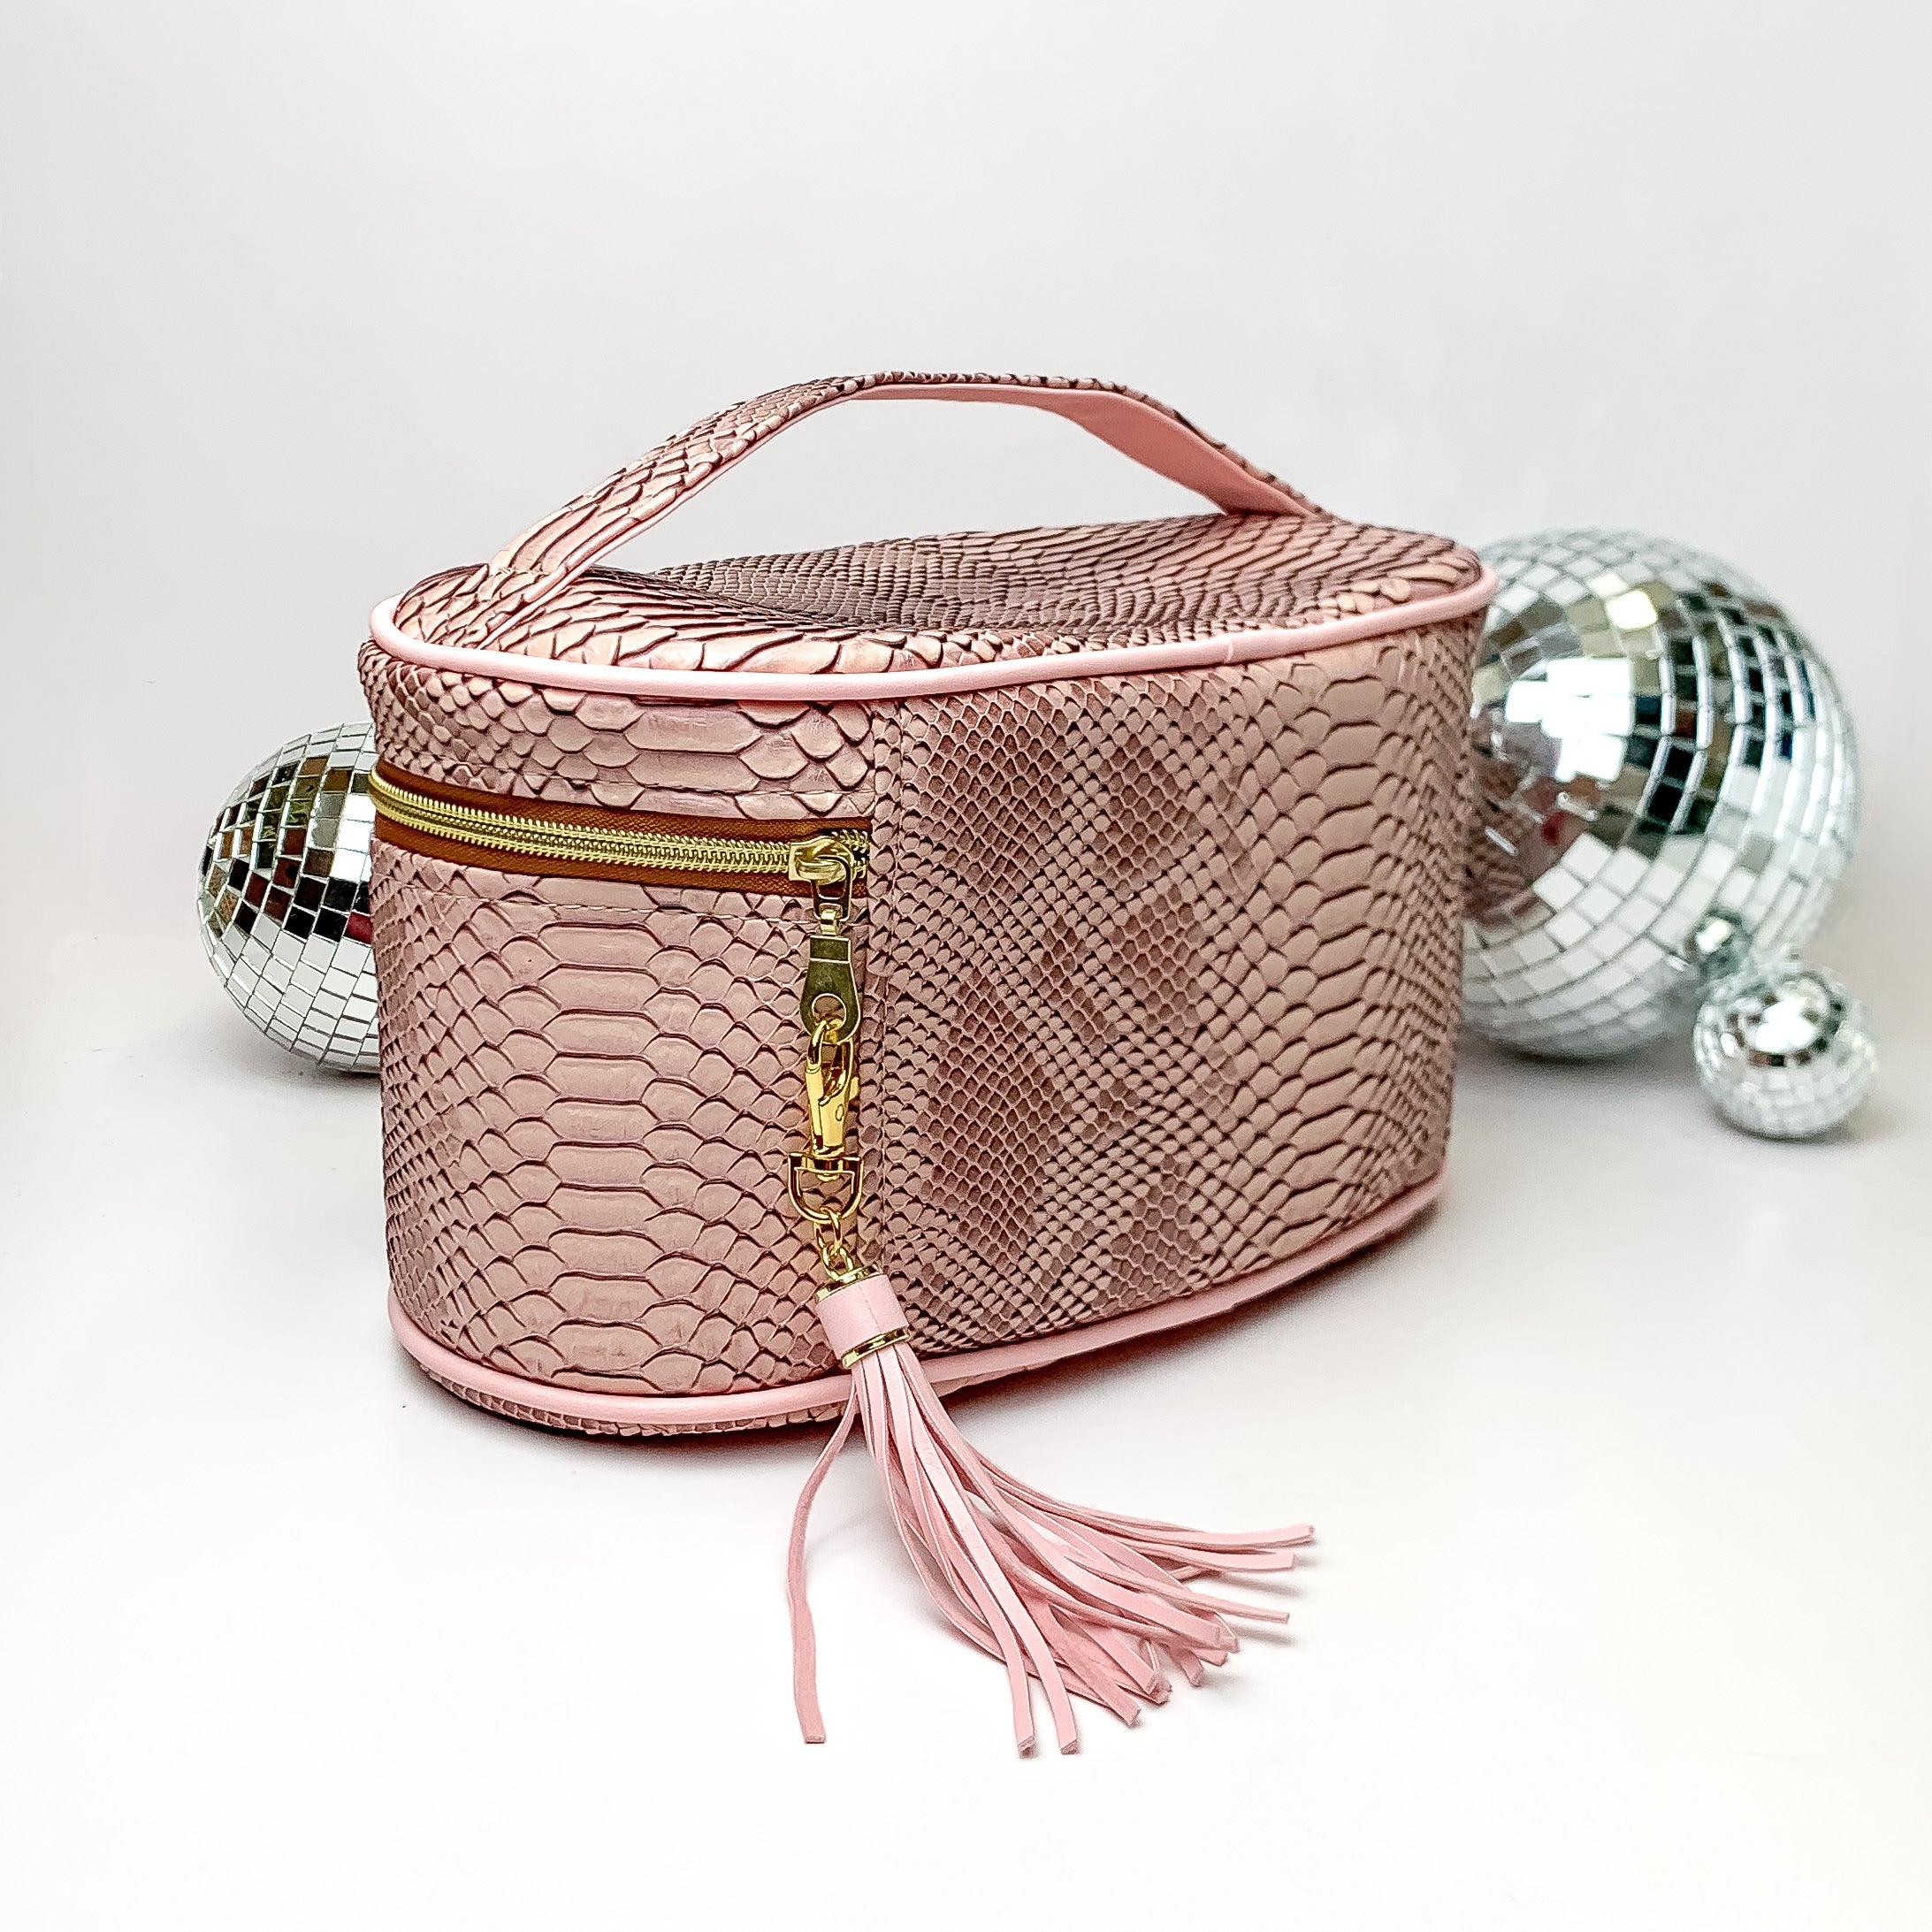 Makeup Junkie | Medium Copperazzi Train Case in Dusty Pink Snake Print - Giddy Up Glamour Boutique